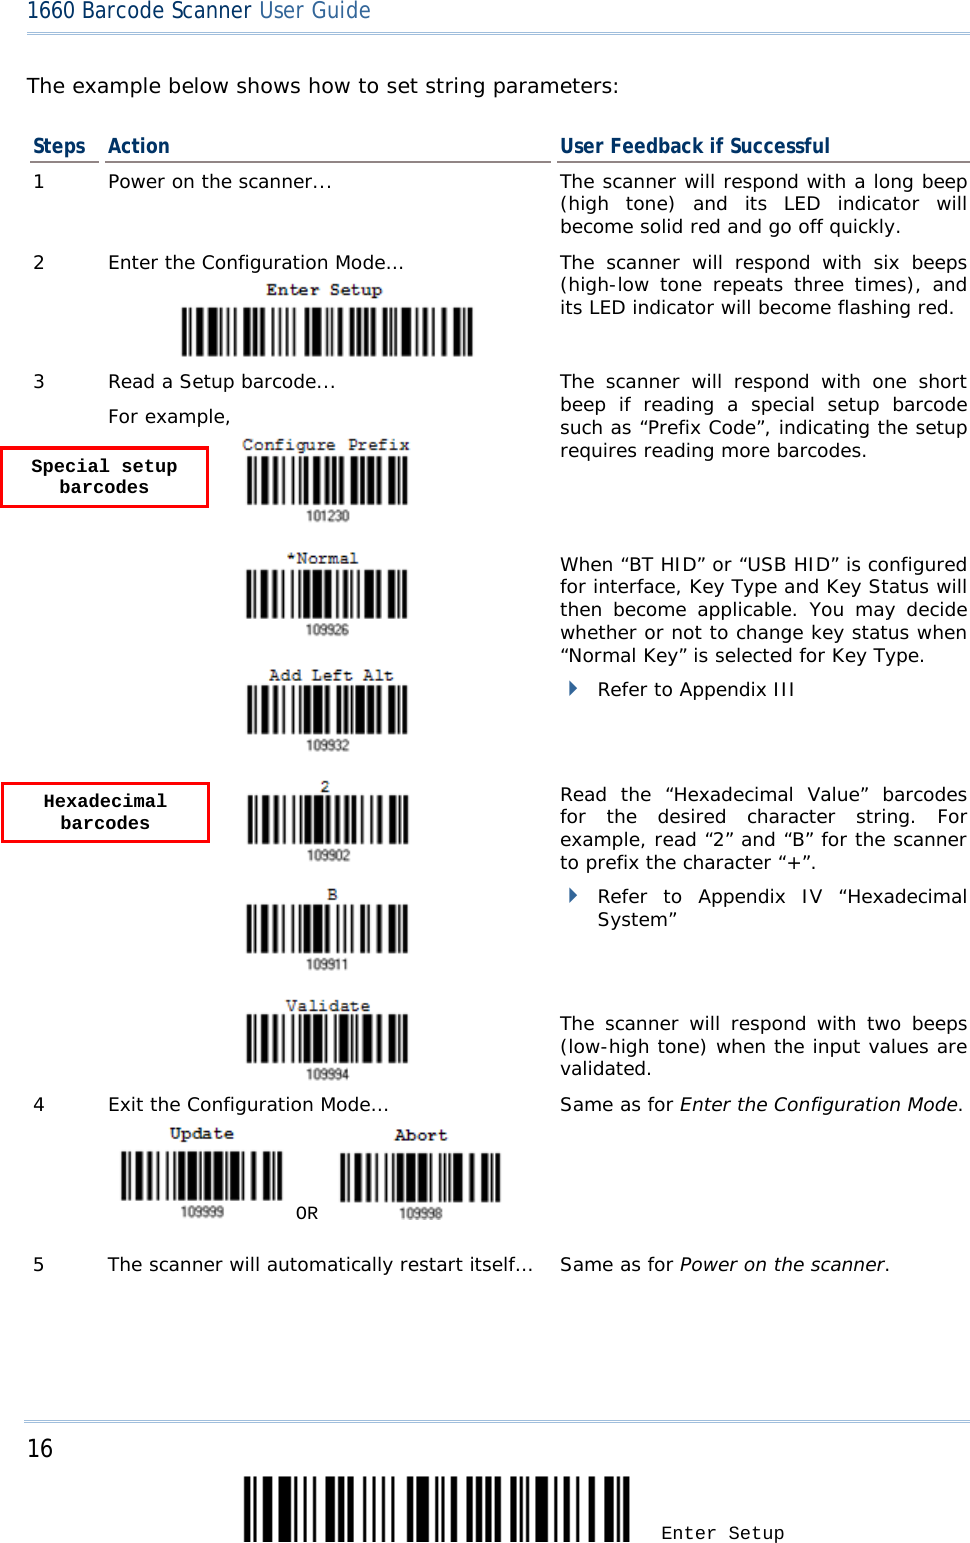 16 Enter Setup 1660 Barcode Scanner User Guide  The example below shows how to set string parameters: Steps Action User Feedback if Successful 1  Power on the scanner... The scanner will respond with a long beep (high tone) and its LED indicator will become solid red and go off quickly. 2  Enter the Configuration Mode…  The scanner will respond with six beeps (high-low tone repeats three times), and its LED indicator will become flashing red.  3  Read a Setup barcode... For example,   The scanner will respond with one short beep if reading a special setup barcode such as “Prefix Code”, indicating the setup requires reading more barcodes.       When “BT HID” or “USB HID” is configured for interface, Key Type and Key Status will then become applicable. You may decide whether or not to change key status when “Normal Key” is selected for Key Type.  Refer to Appendix III      Read the “Hexadecimal Value” barcodes for the desired character string. For example, read “2” and “B” for the scanner to prefix the character “+”.  Refer to Appendix IV  “Hexadecimal System”   The scanner will respond with two beeps (low-high tone) when the input values are validated. 4  Exit the Configuration Mode…    OR     Same as for Enter the Configuration Mode. 5  The scanner will automatically restart itself… Same as for Power on the scanner.   Hexadecimal barcodes  Special setup barcodes 